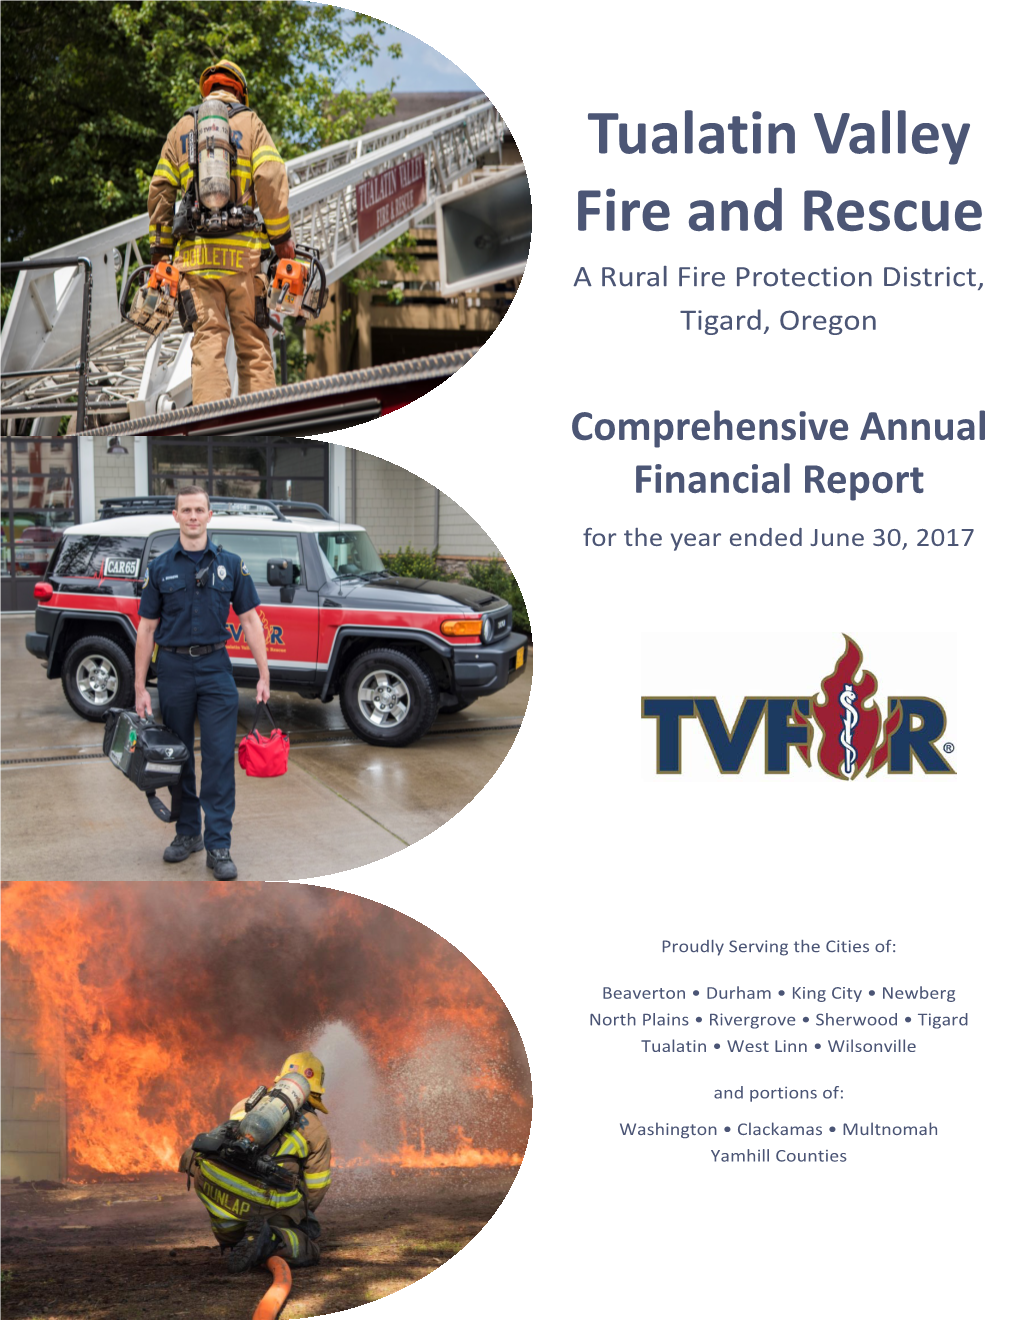 Tualatin Valley Fire and Rescue a Rural Fire Protection District, Tigard, Oregon